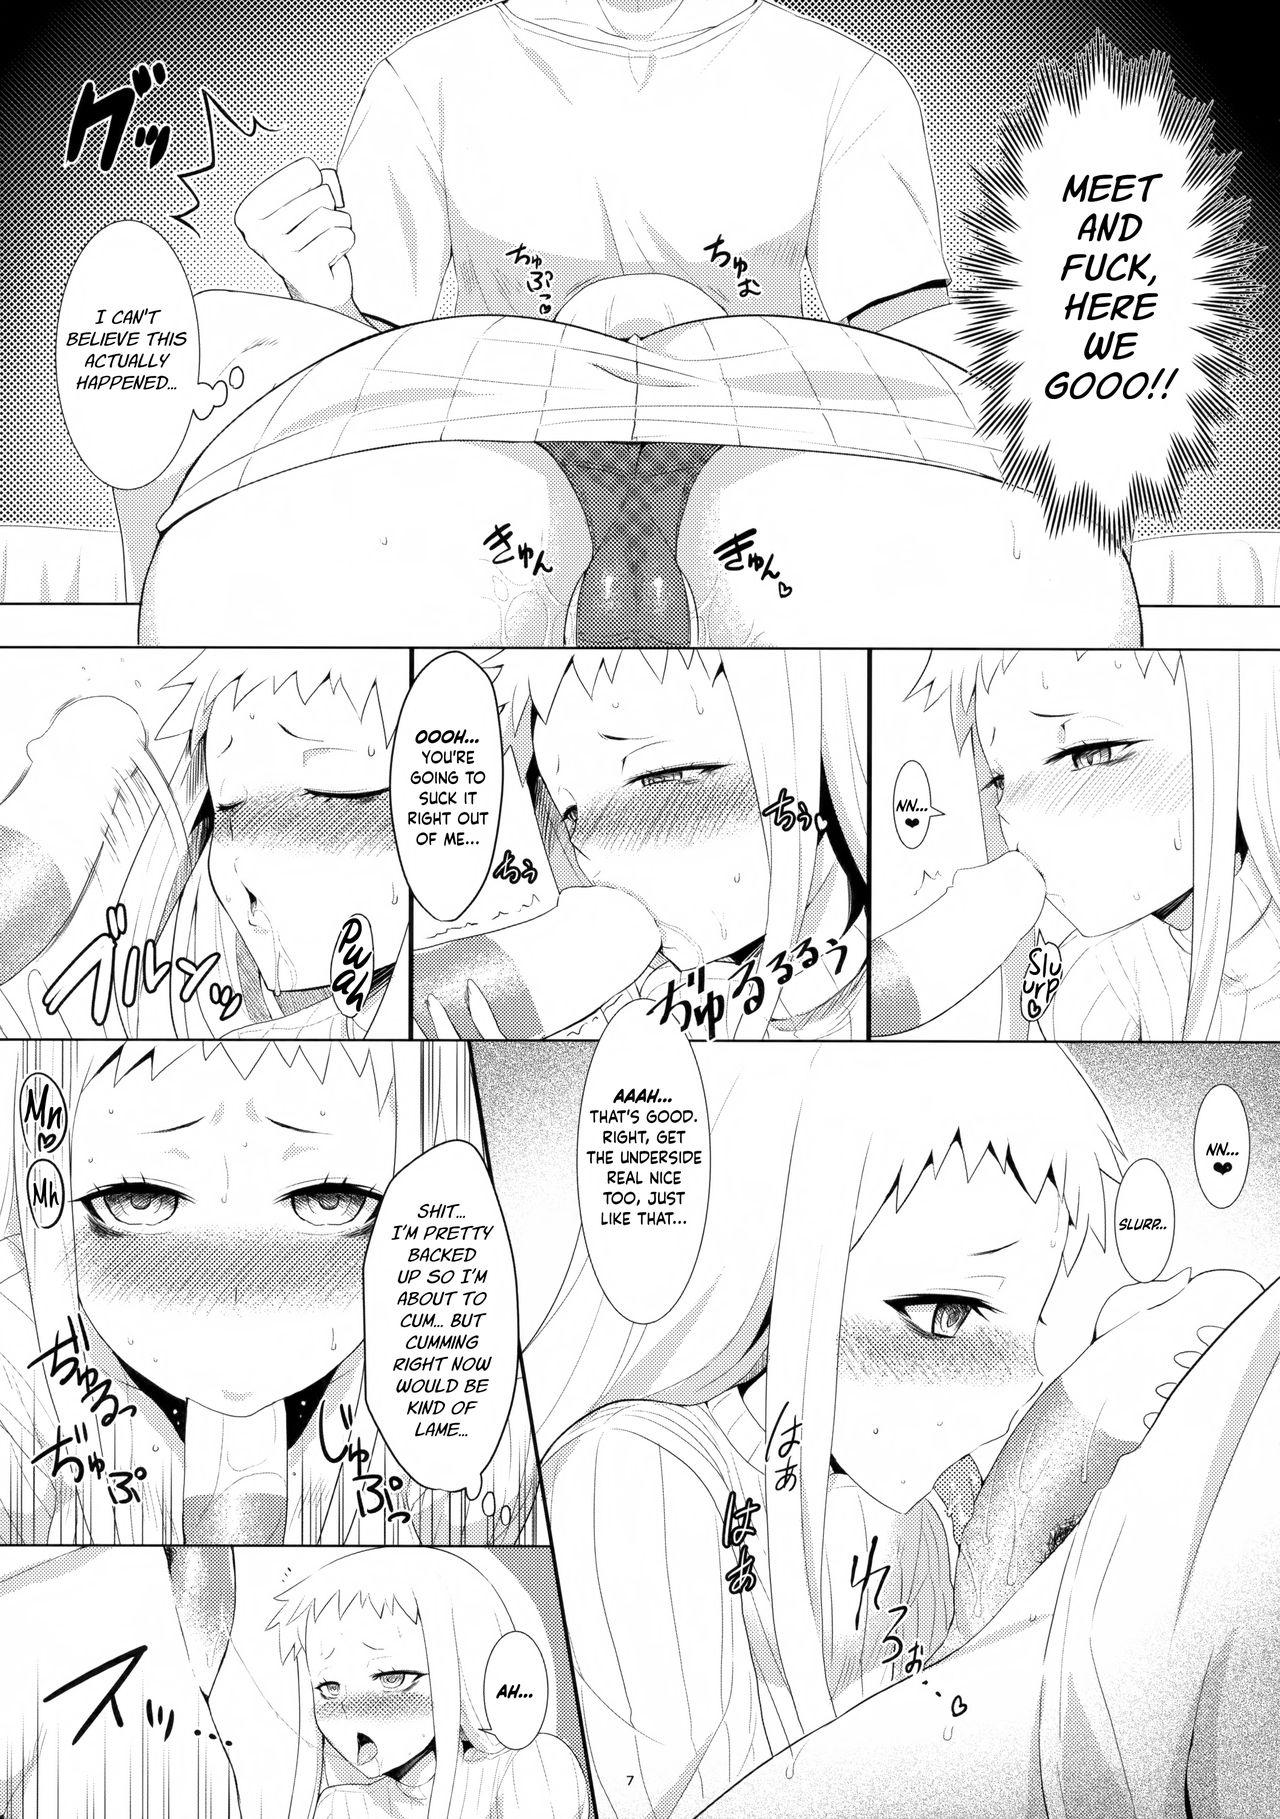 Off-kaigo Sokupako Shita Musume ga Shinkaiseikan datta Jian | That Time I Fucked a Girl Right After an Offline Meetup and She Turned Out to Be an Abyssal Ship 6